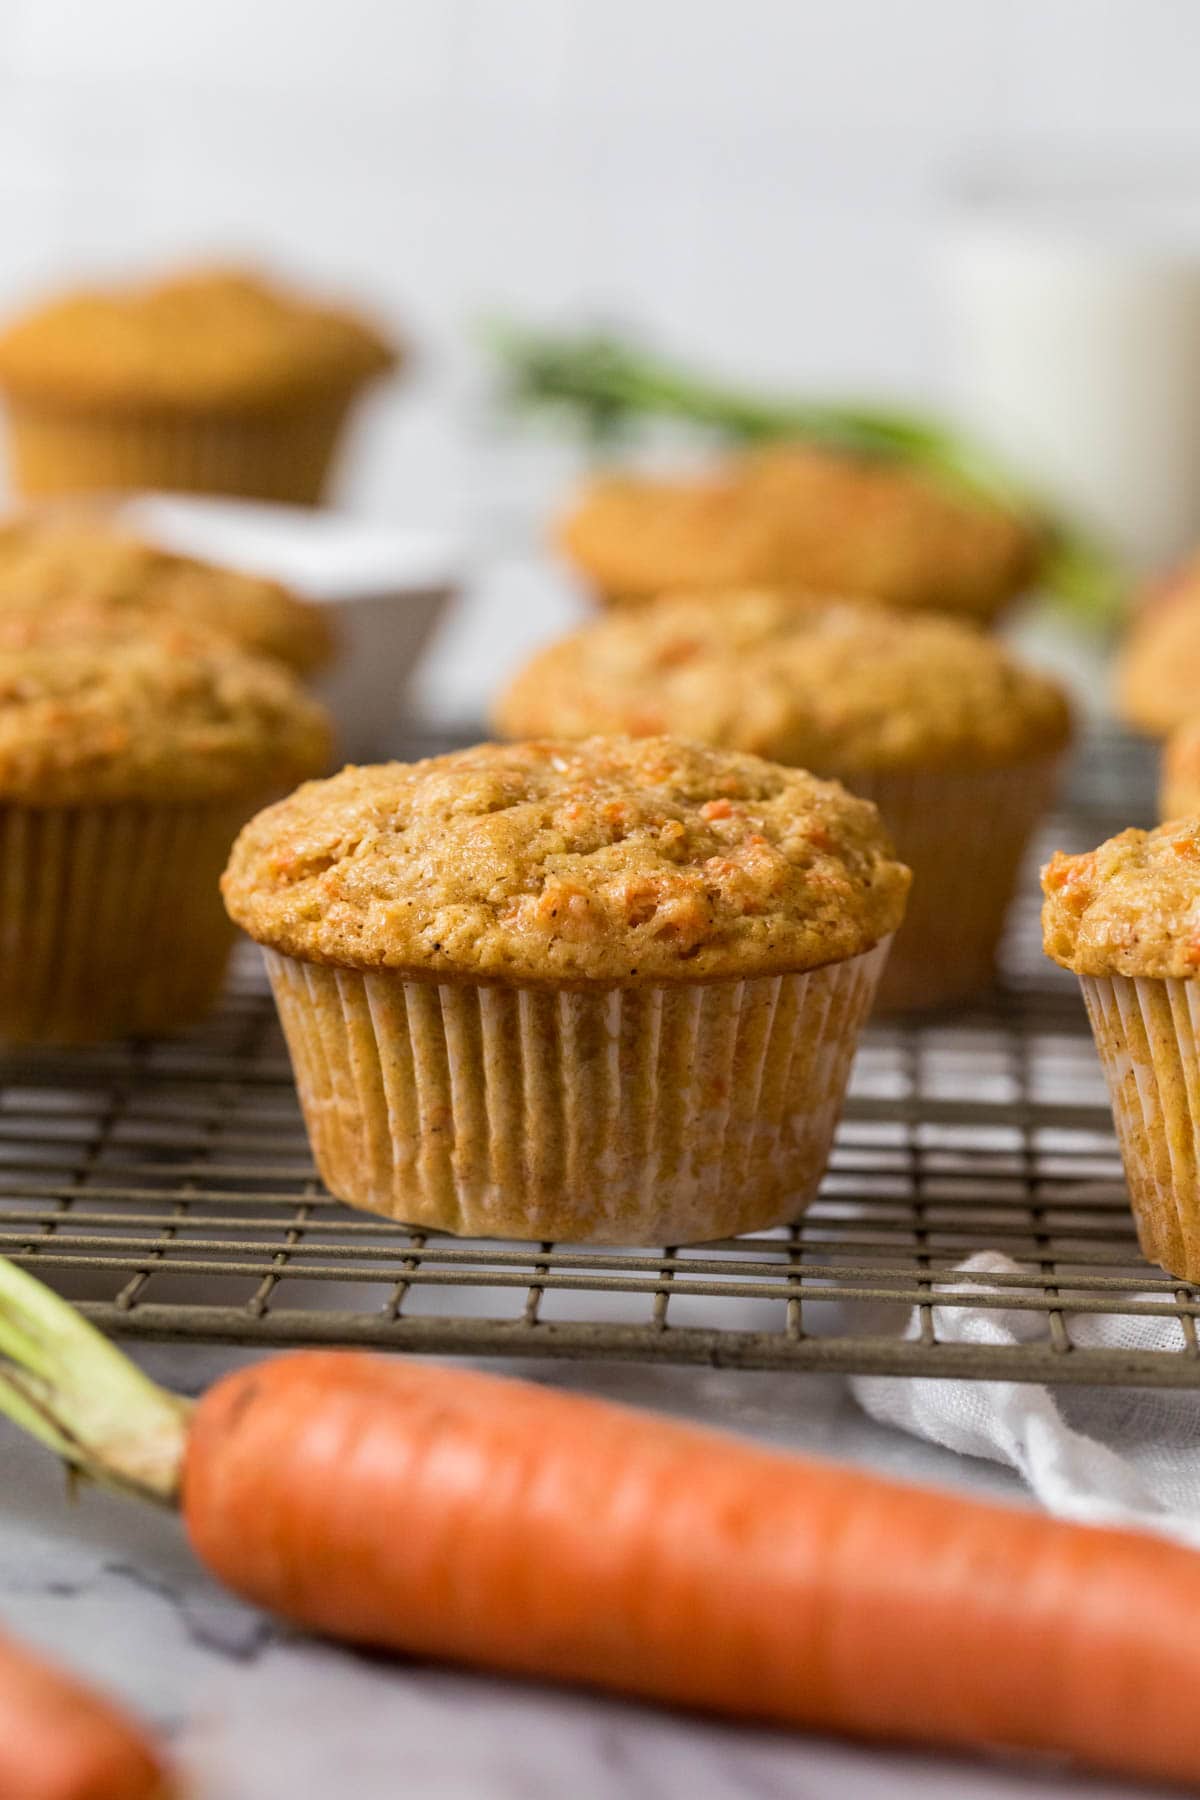 Muffins on a cooling rack with a carrot in the foreground.